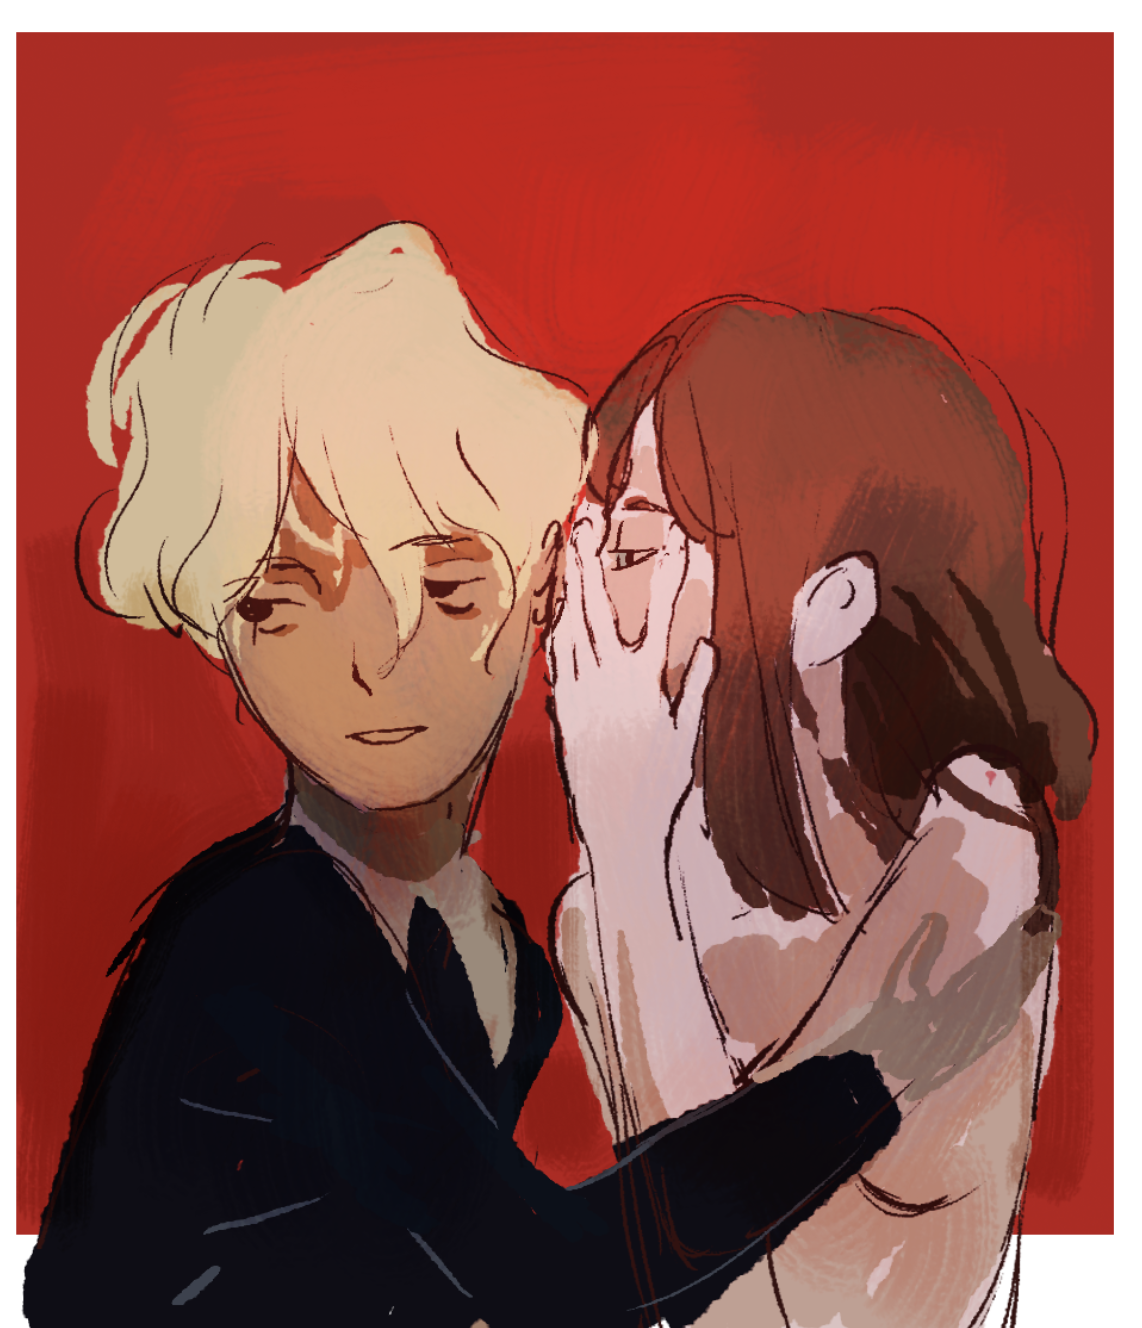 Illustration of a girl whispering into a boy's ear with a red background